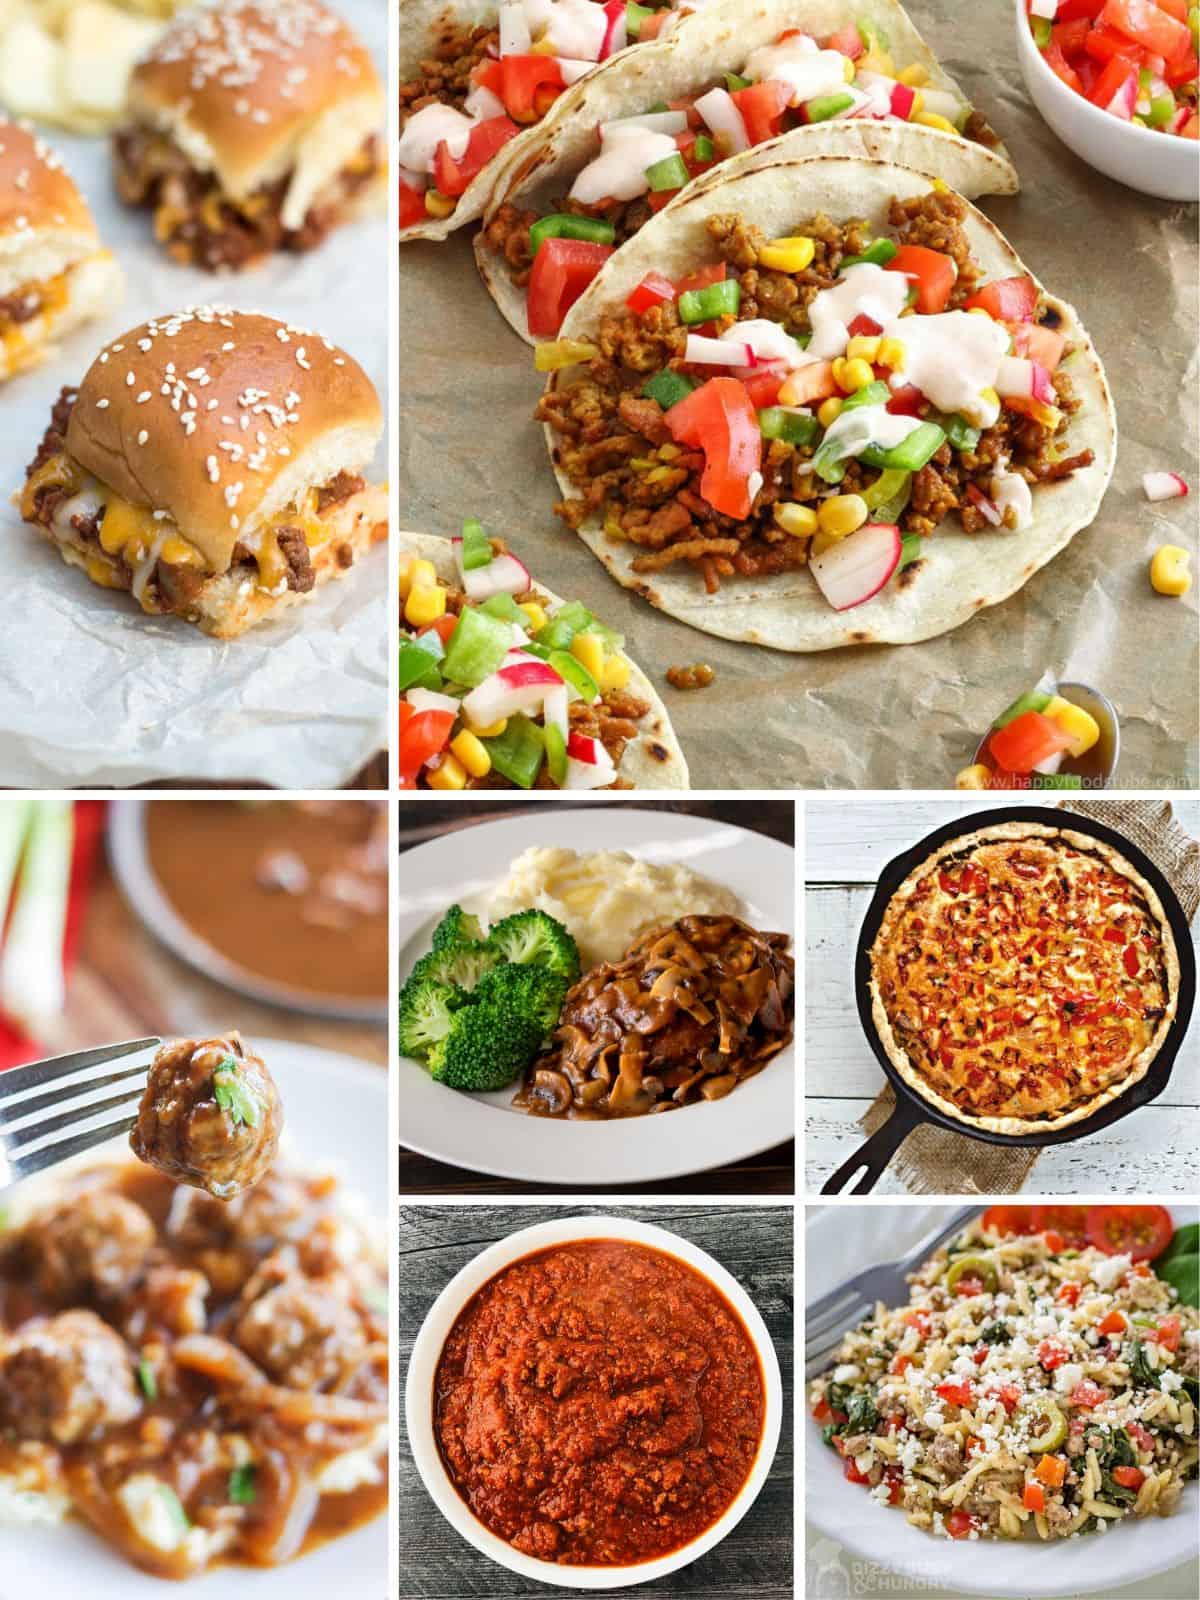 7 recipes for dinner that use ground beef.